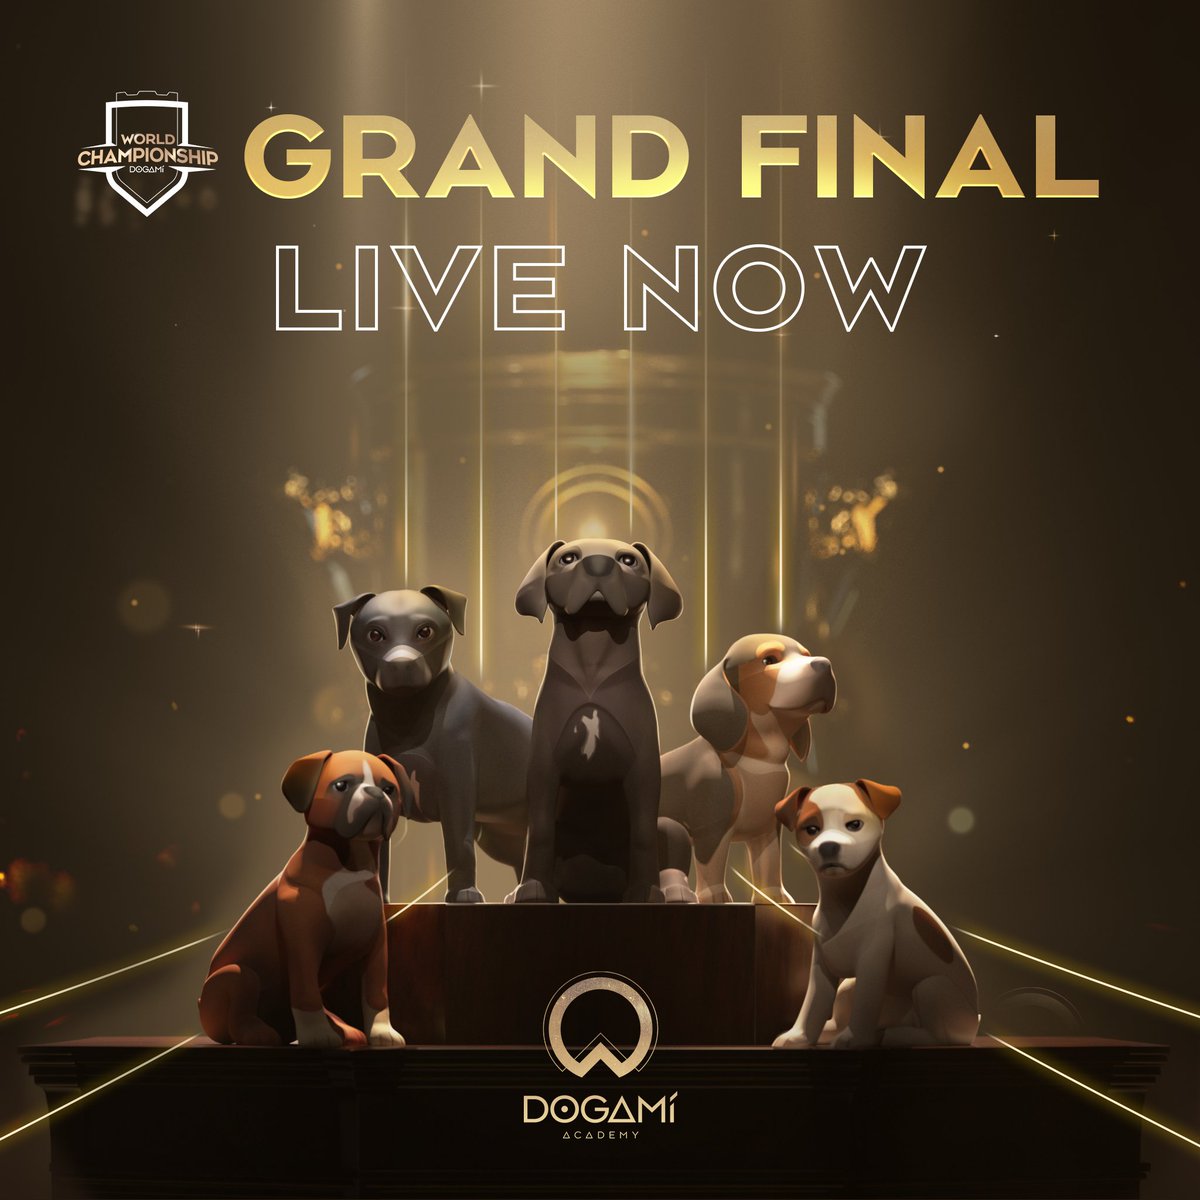 🏁 LAST RACE TO $50,000 🏁 THE DOGAMÍ WORLD CHAMPIONSHIP GRAND FINAL IS NOW LIVE! Train your Gamma dog, compete, and reach the top of the leaderboard! 👑 The Grand Final will end on the 16th of April at 2 PM CEST ⏳ Good luck Dogamers 🍀